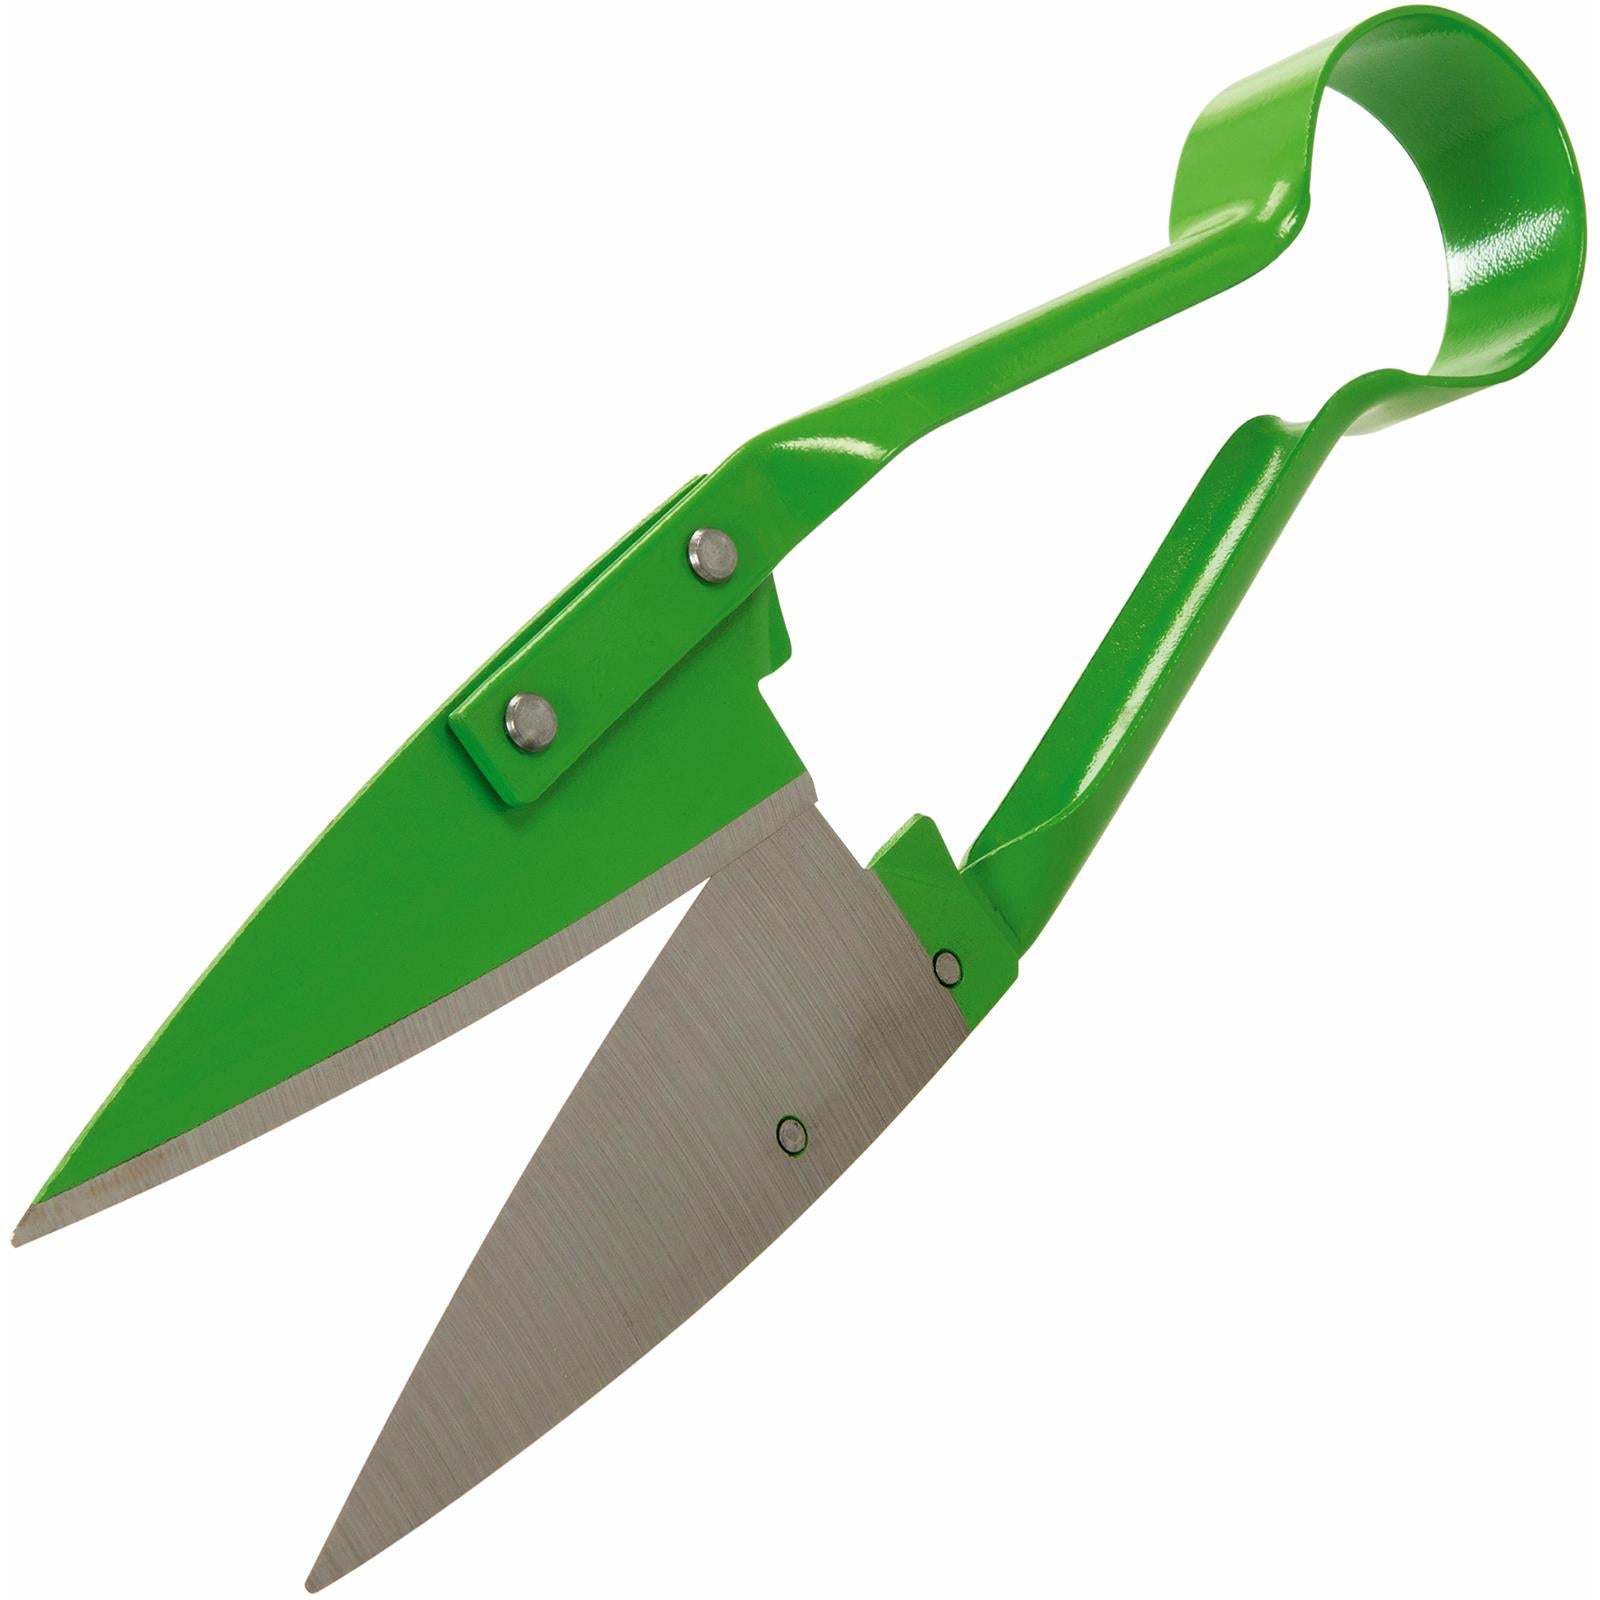 Silverline One Handed Topiary Shears 155mm Blade Trimming Garden Pruning Cutting